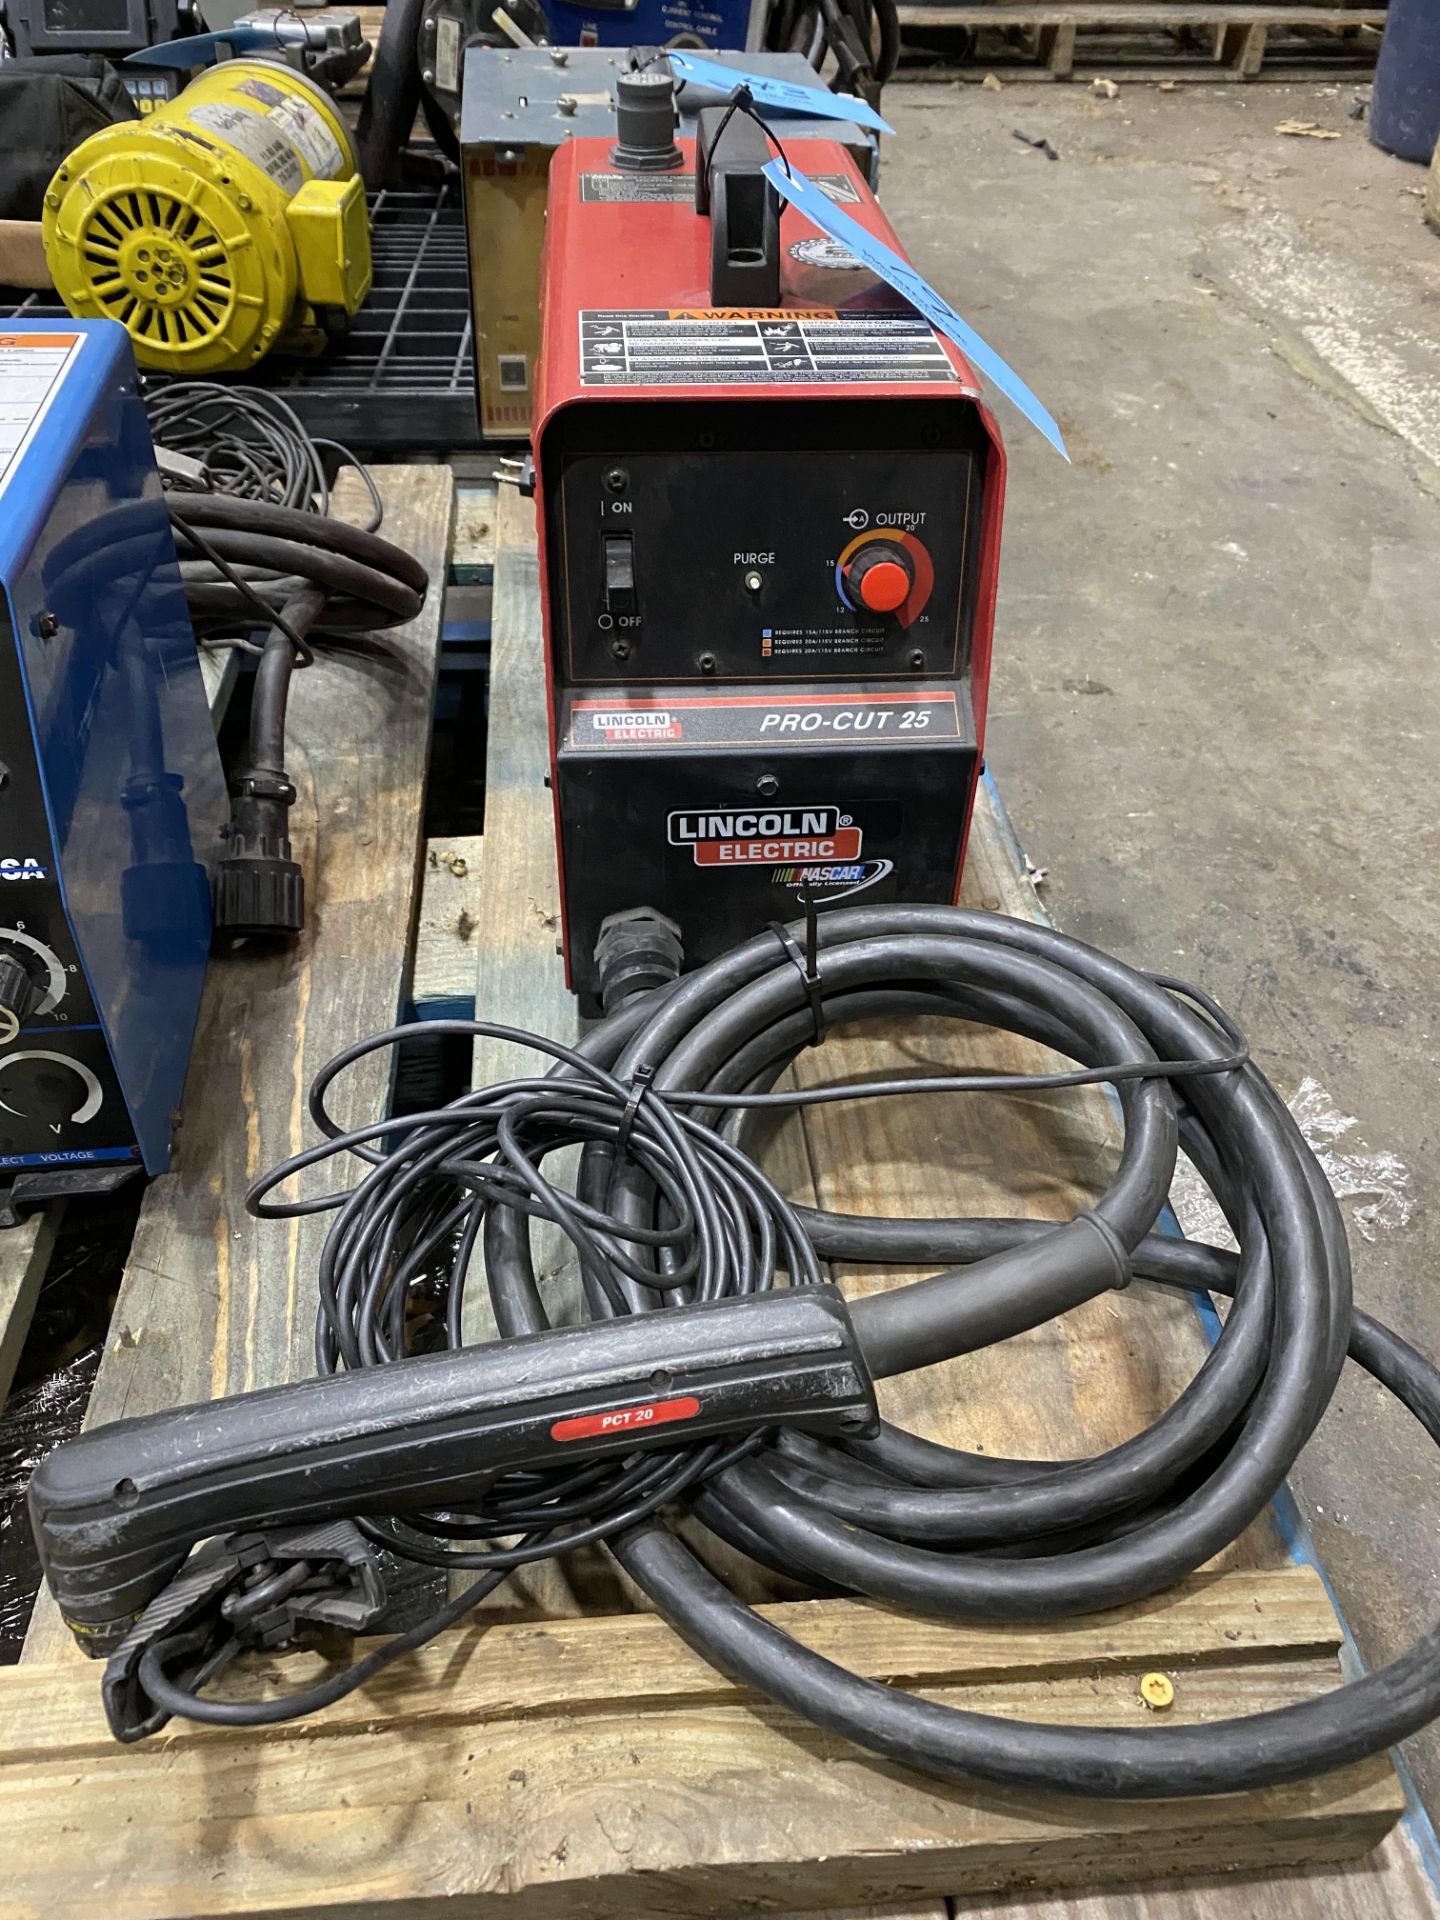 Lincoln Pro-Cut 25 Plasma Cutter, PCT20 Hand Torch